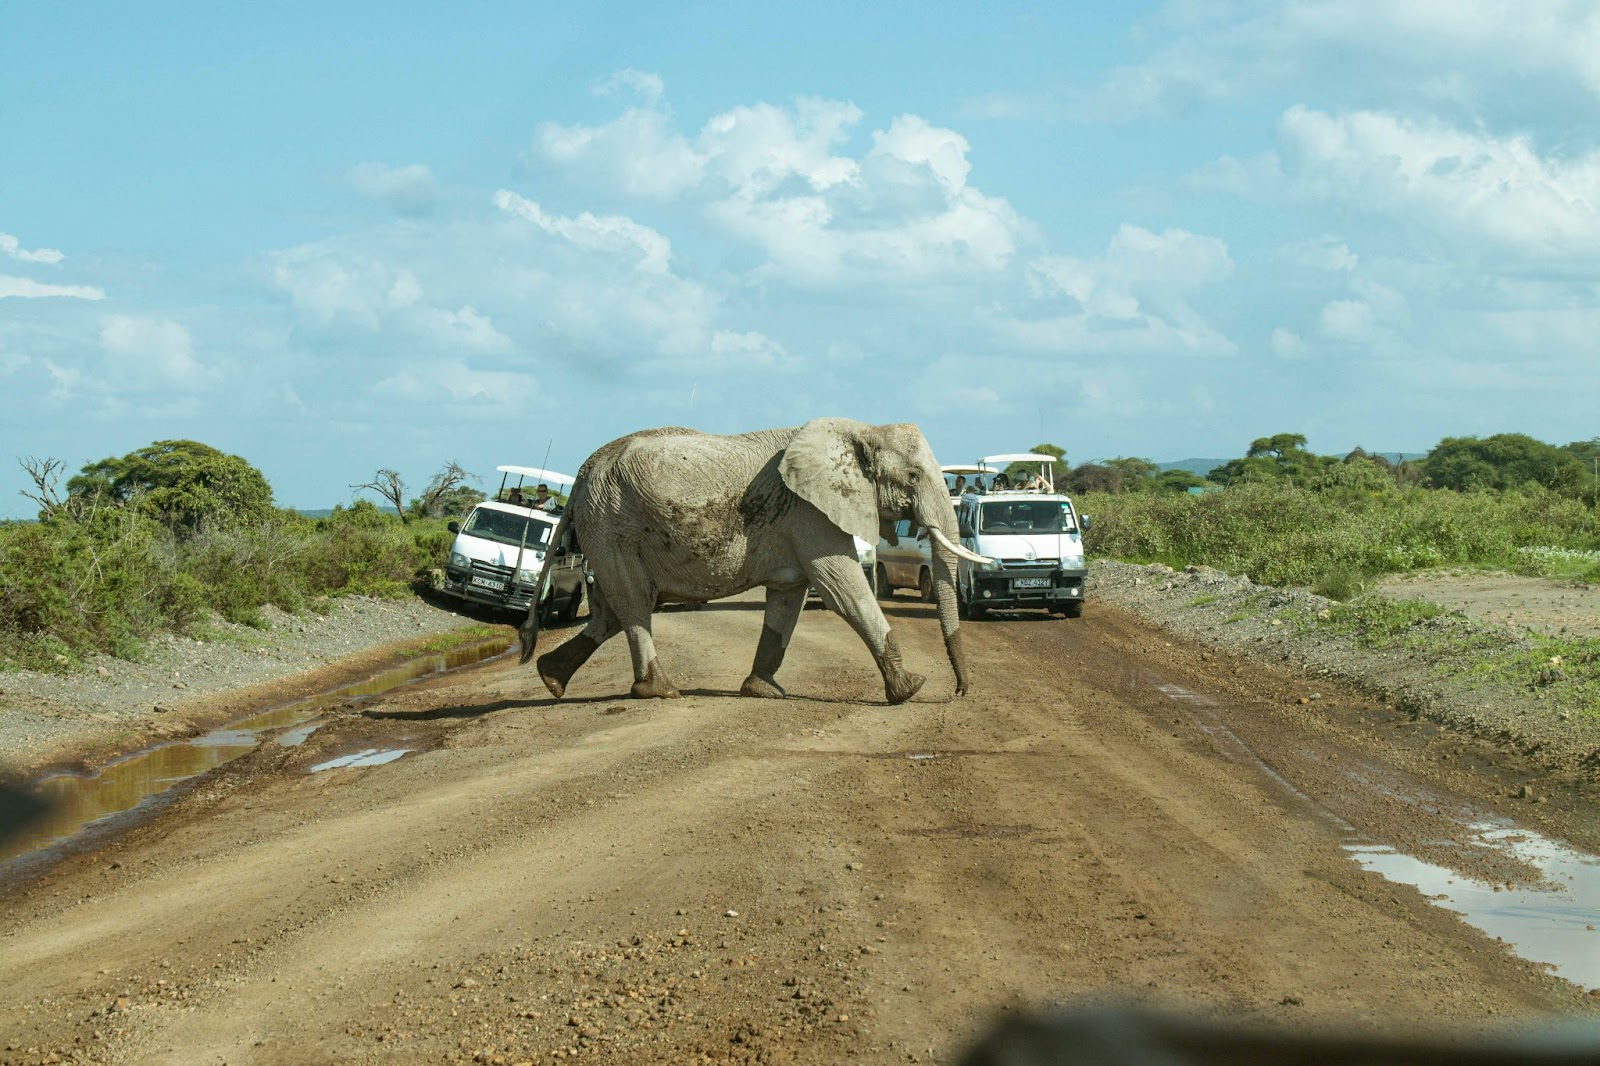 Travelers should be sure to capture many memories while visiting Kenya. 
pictured: an elephant in front of a tour group